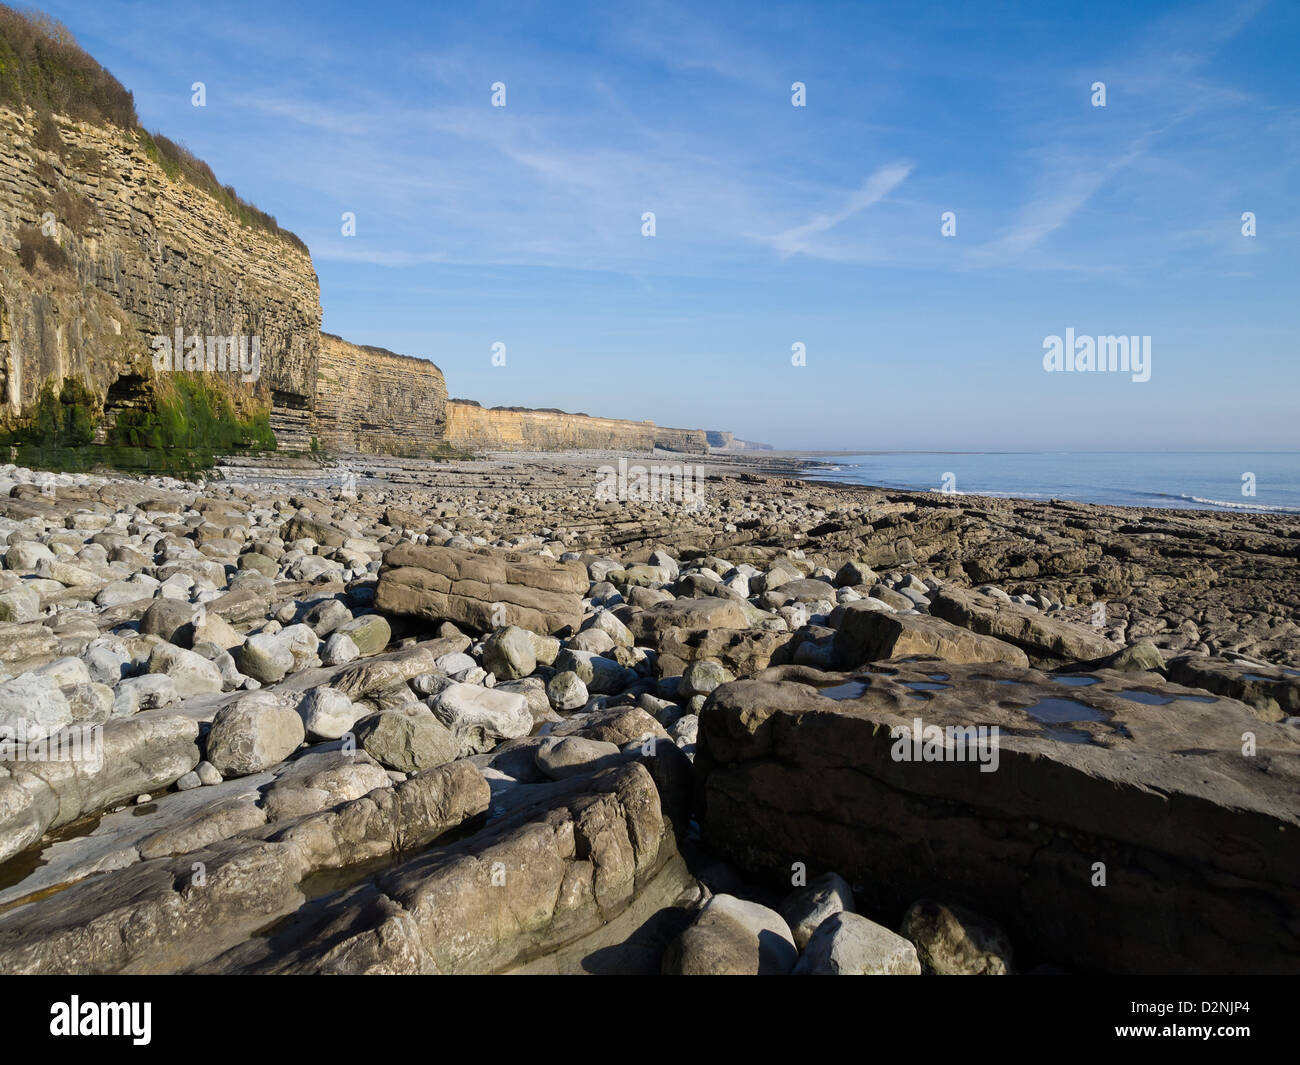 coastal scene with cliffs rocks and boulders Stock Photo